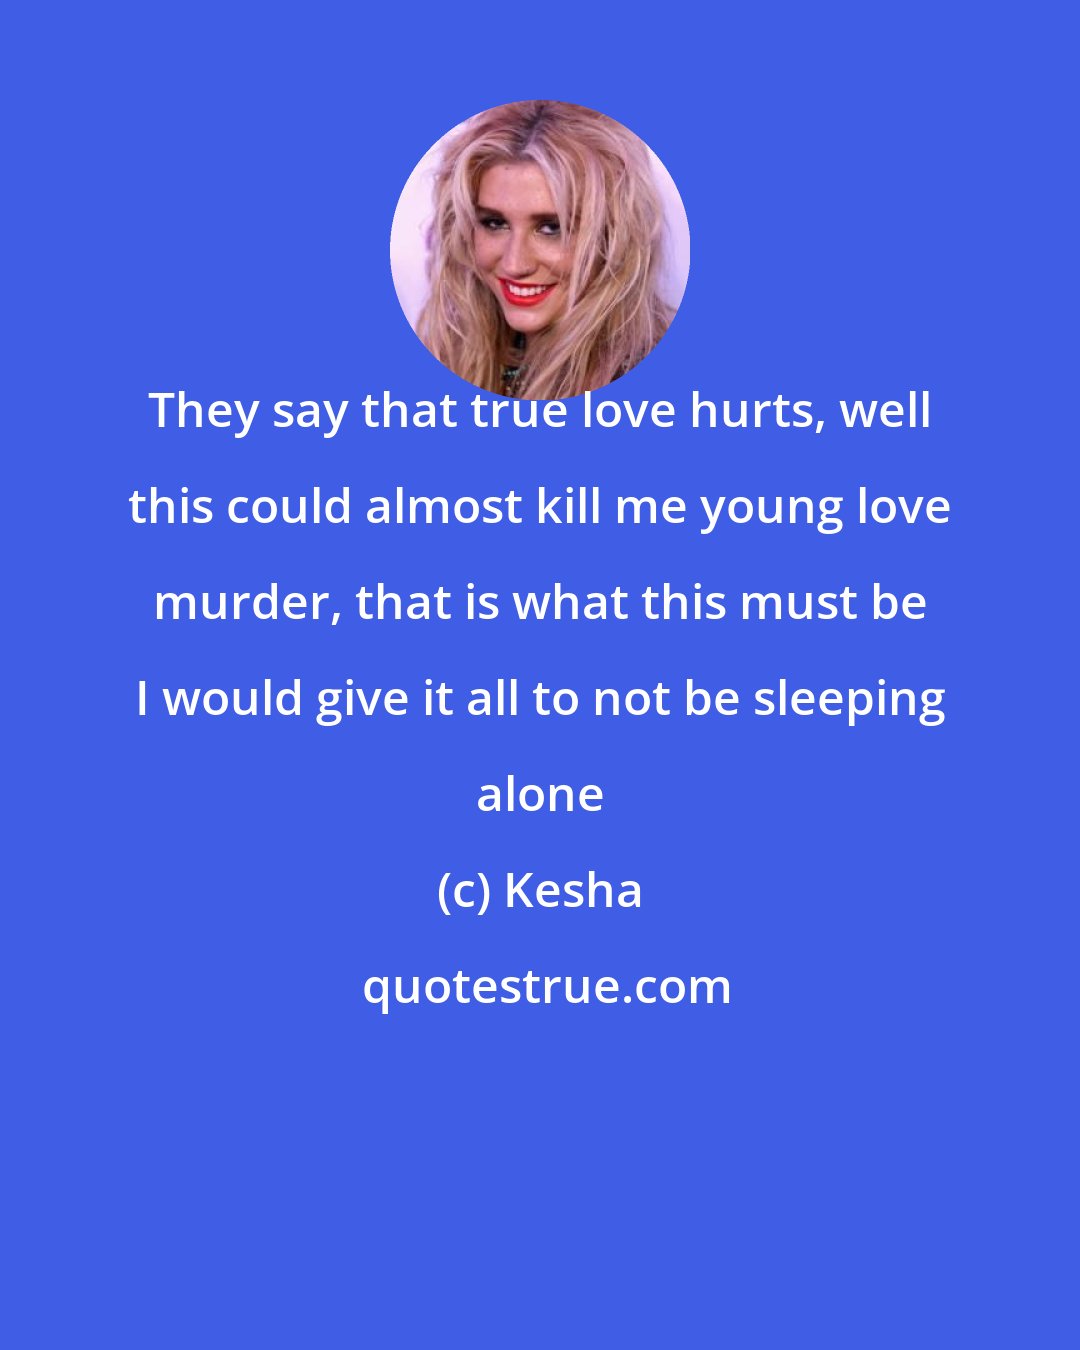 Kesha: They say that true love hurts, well this could almost kill me young love murder, that is what this must be I would give it all to not be sleeping alone